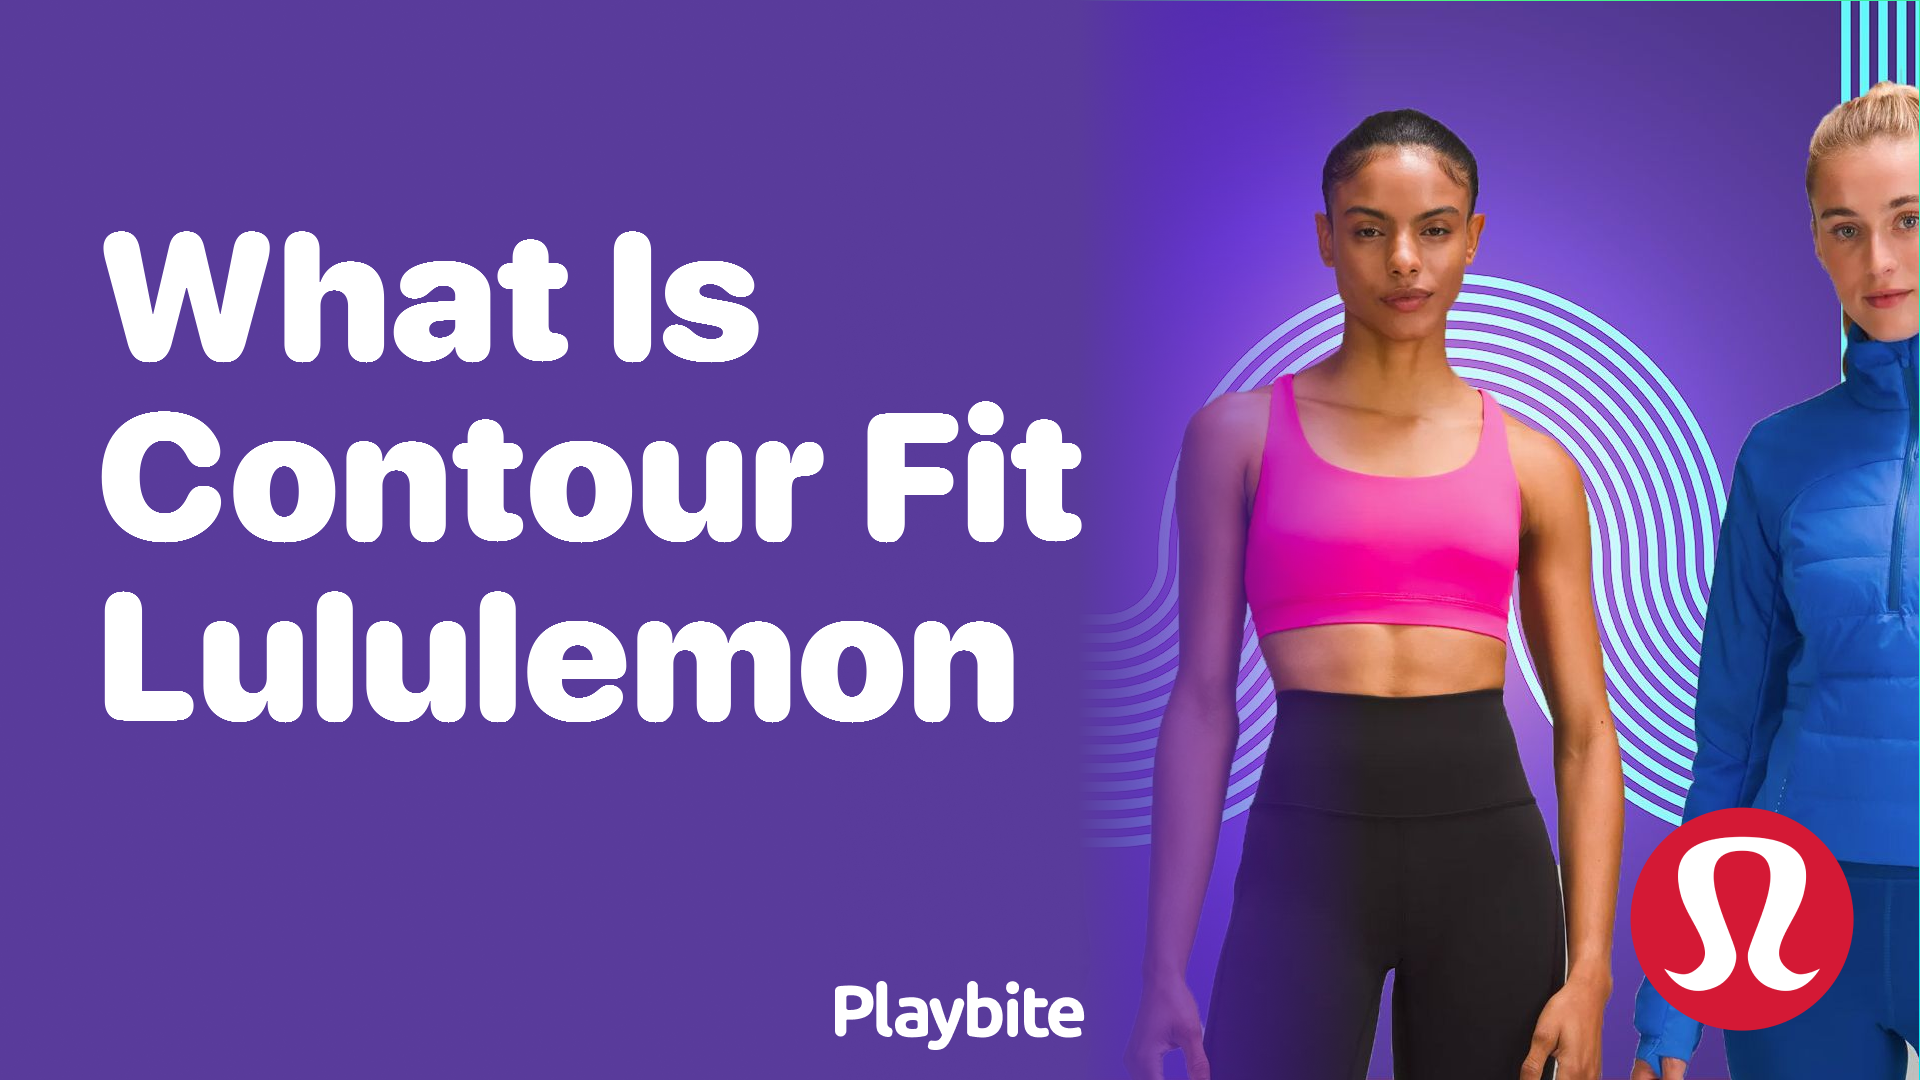 What Is Contour Fit Lululemon? Exploring Comfort and Style - Playbite